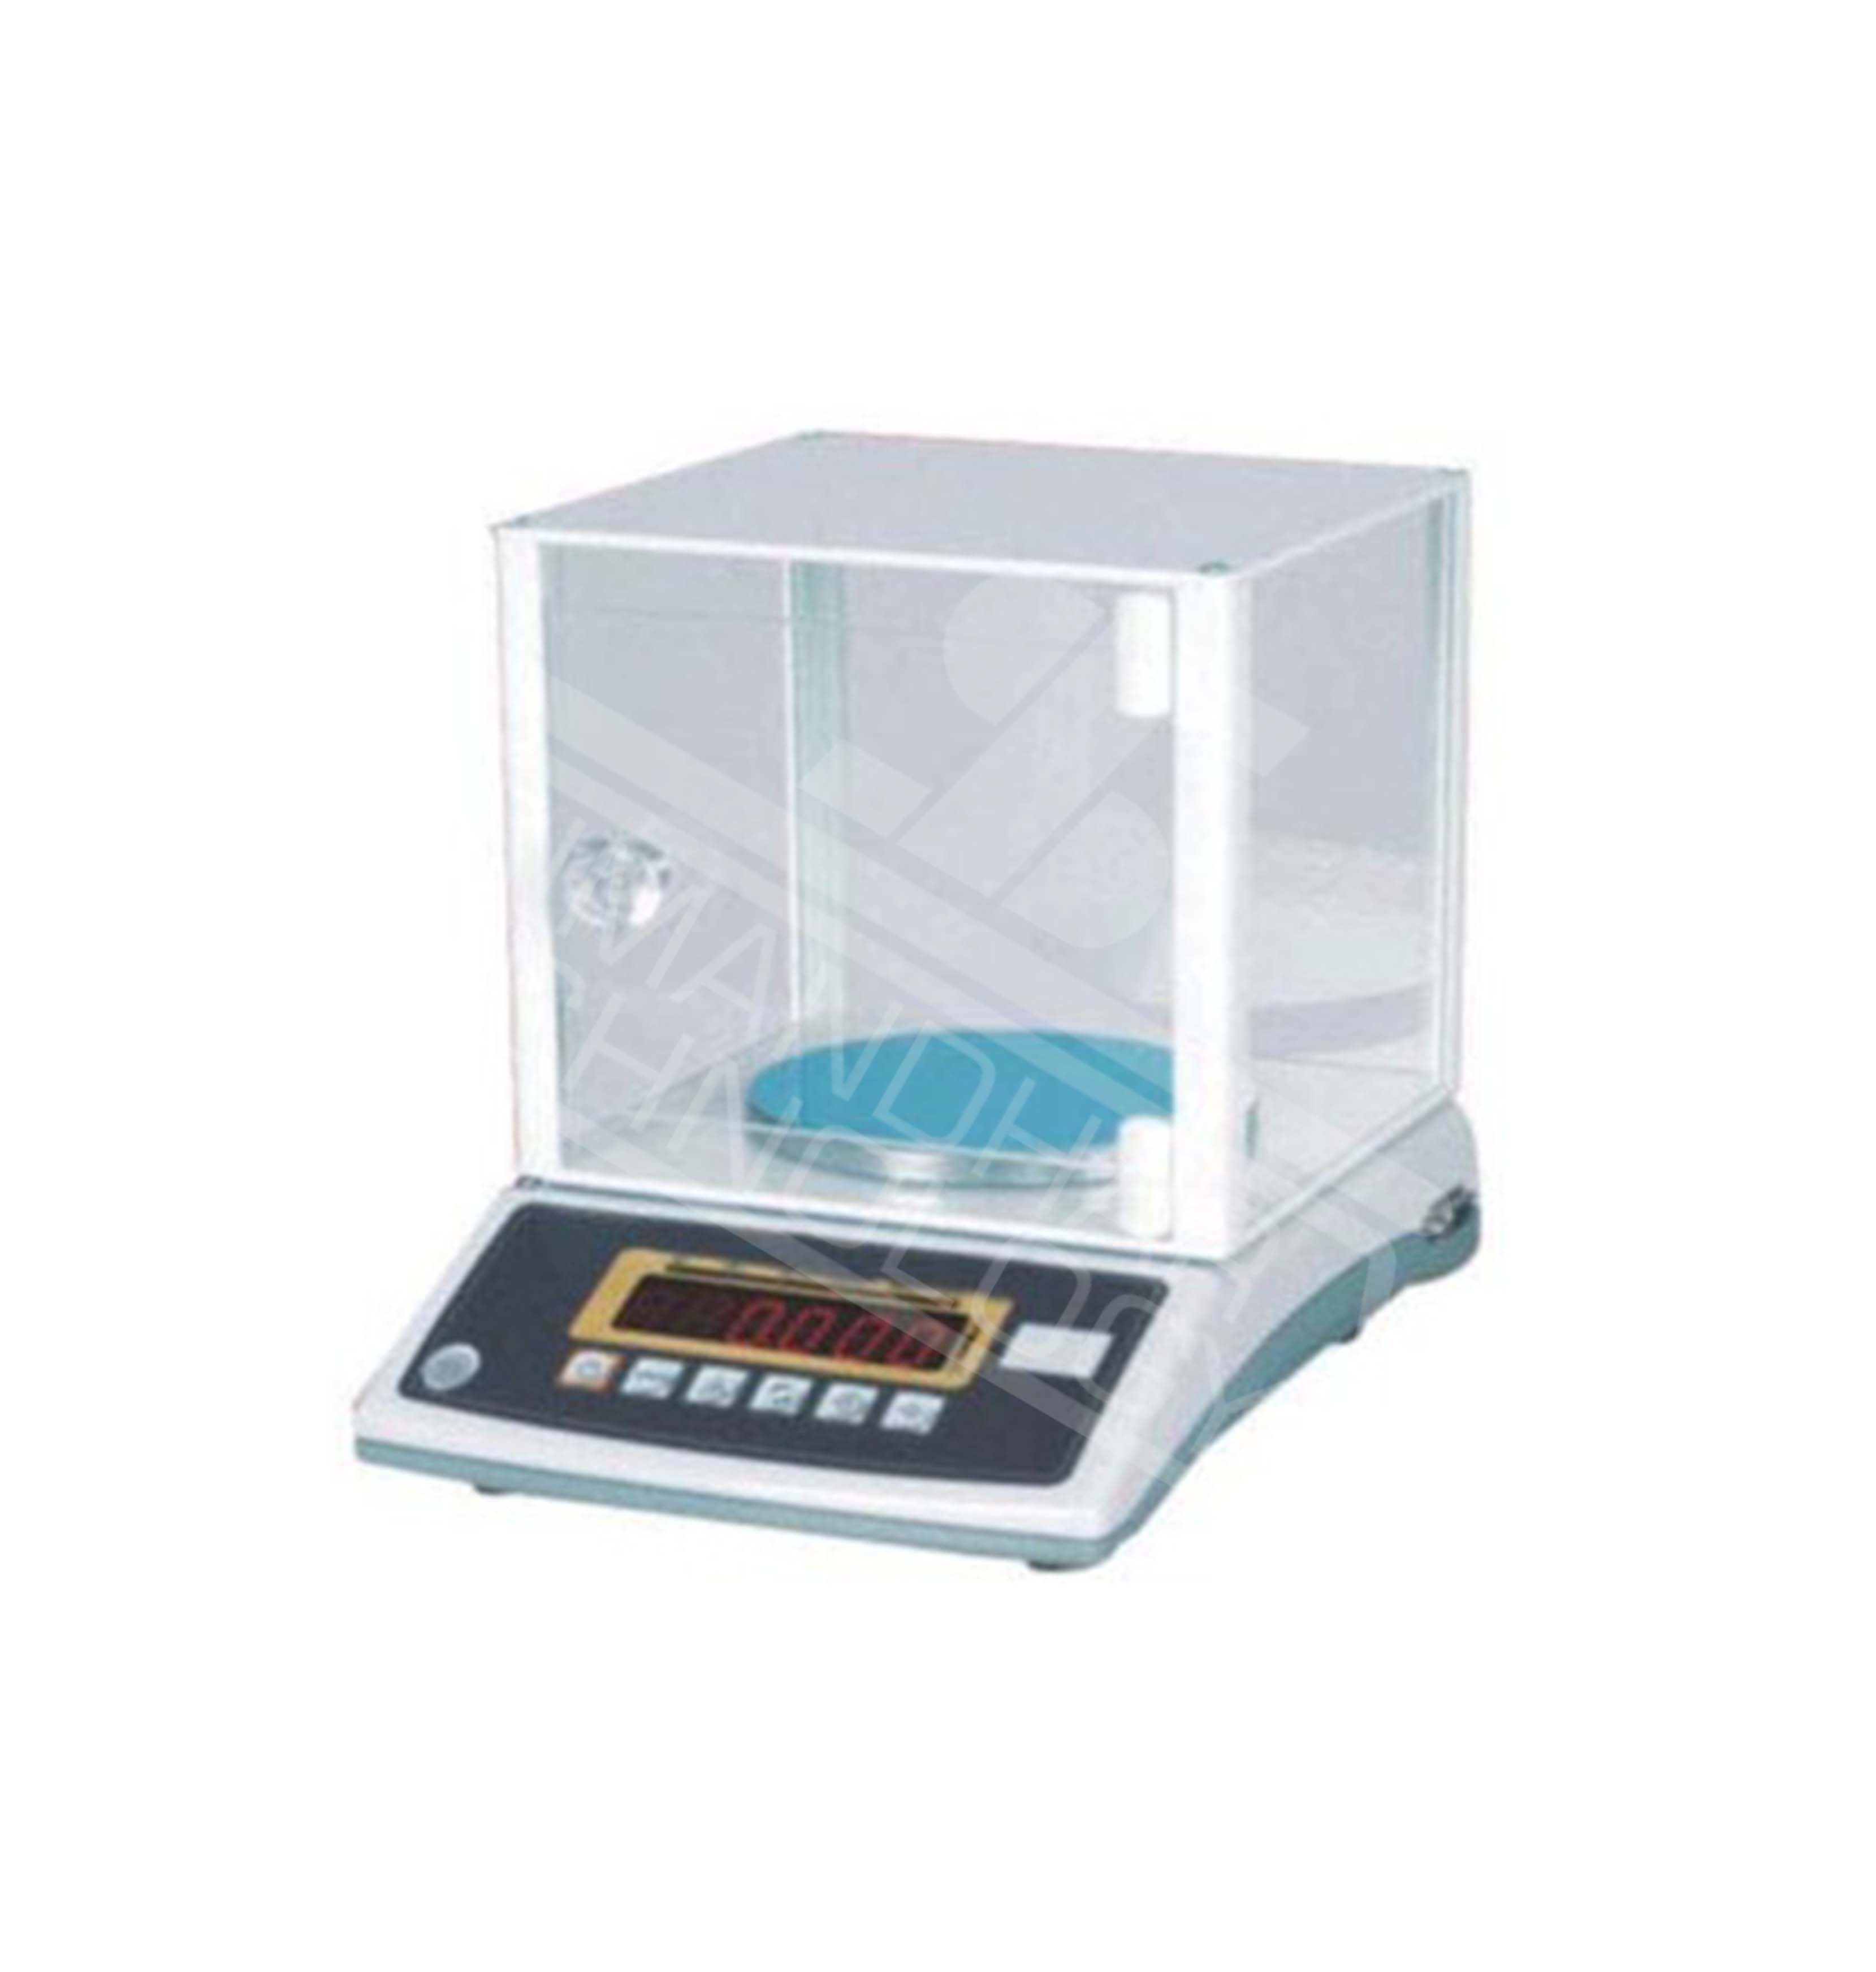 Jewellery Weighing Scale Manufacturer in Amritsar